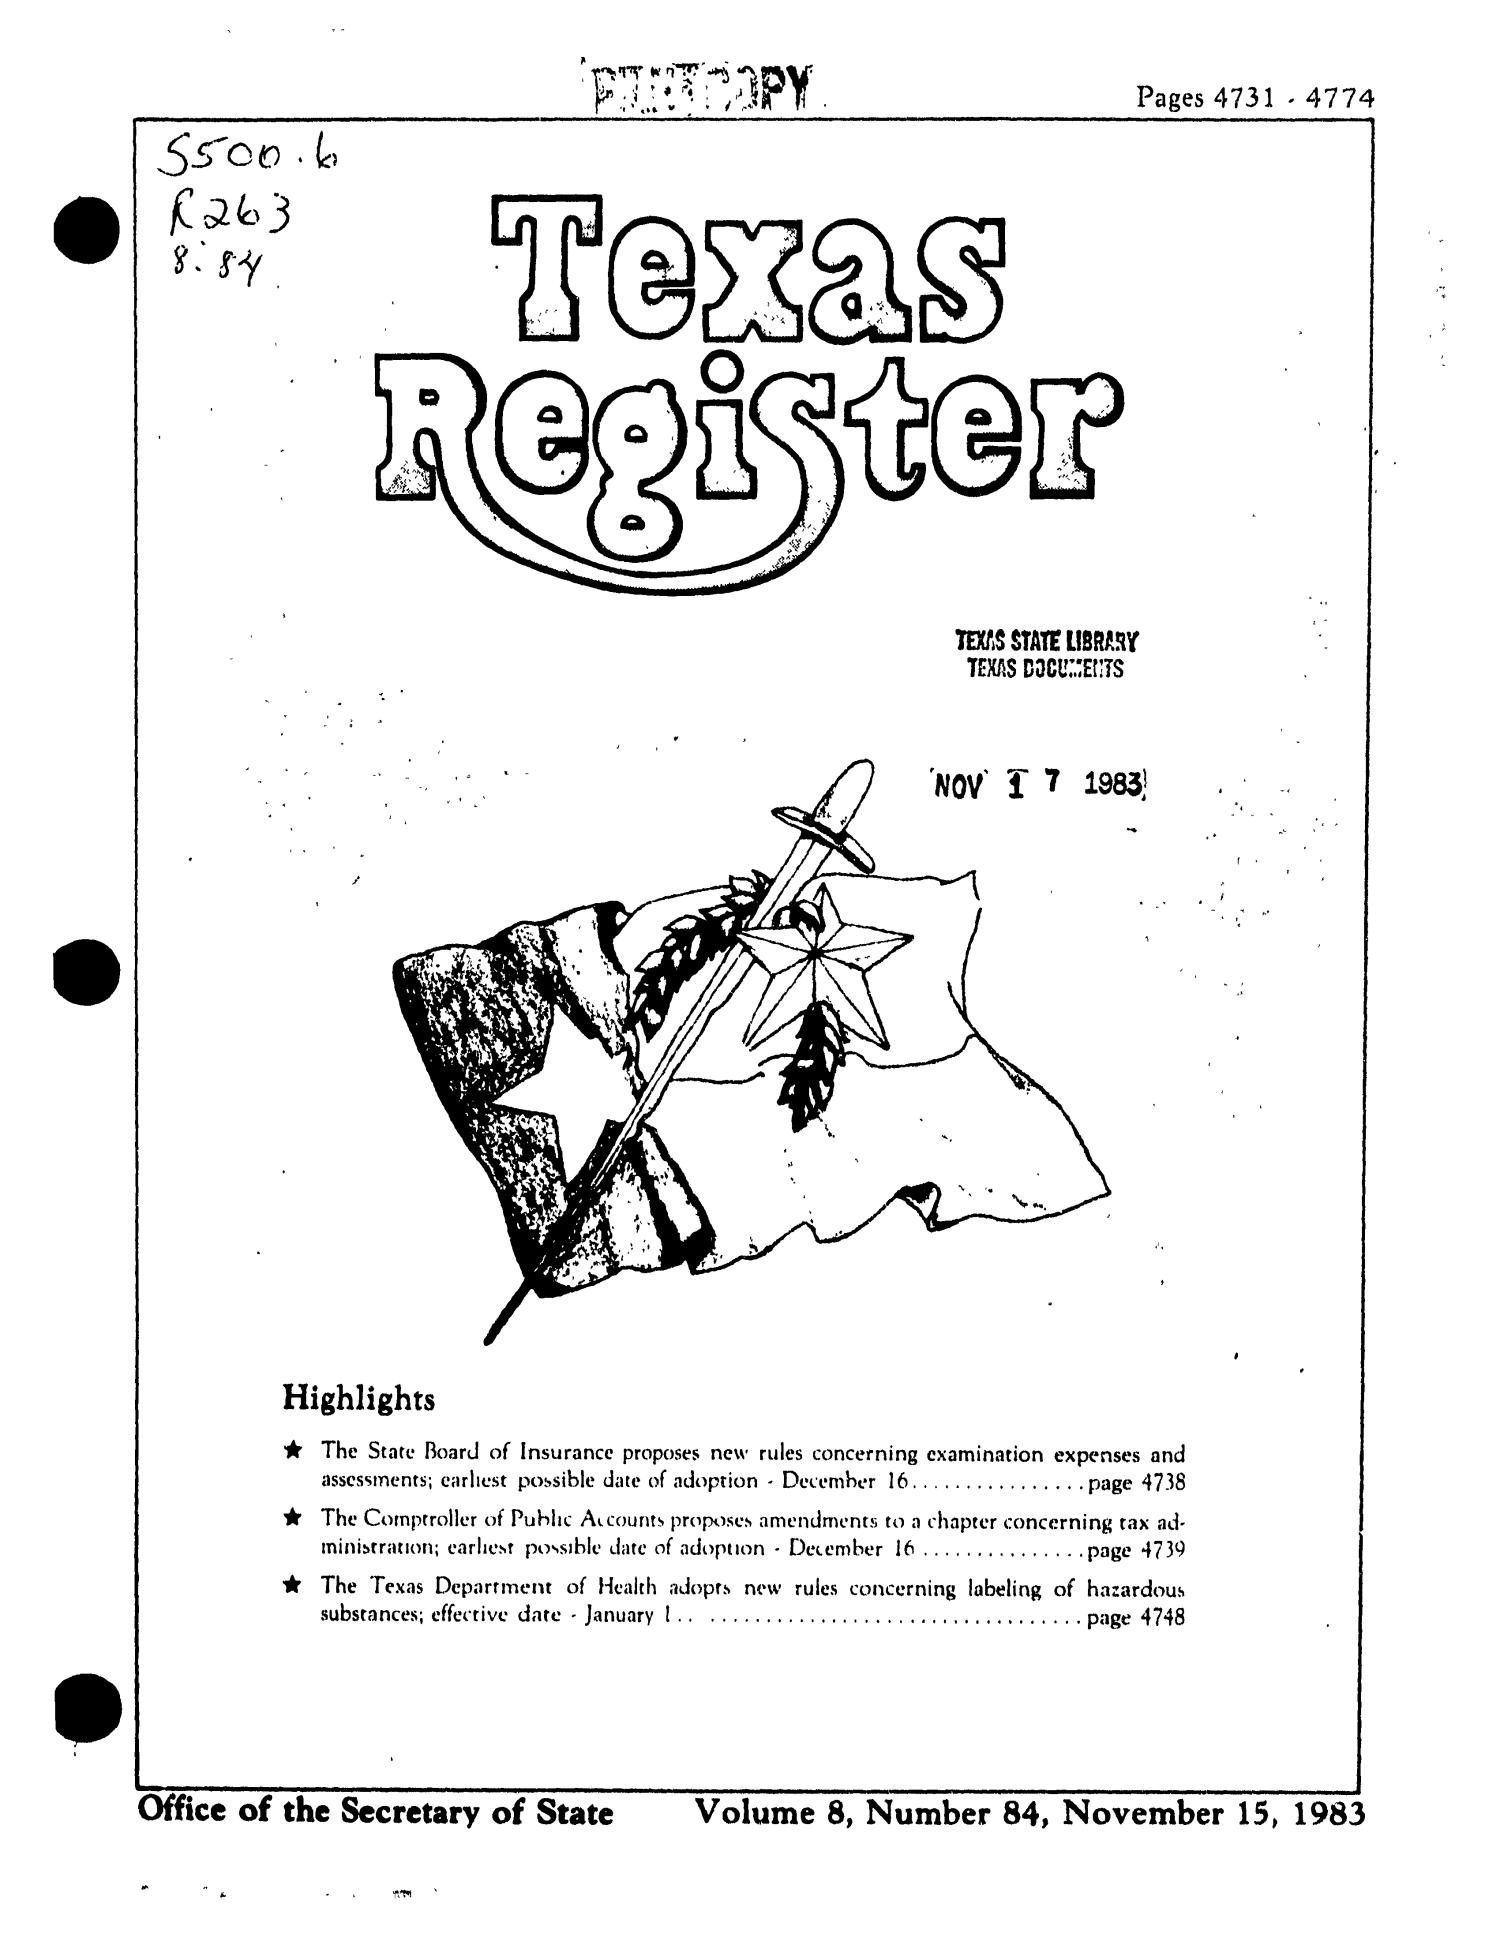 Texas Register, Volume 8, Number 84, Pages 4731-4474, November 15, 1983
                                                
                                                    Title Page
                                                